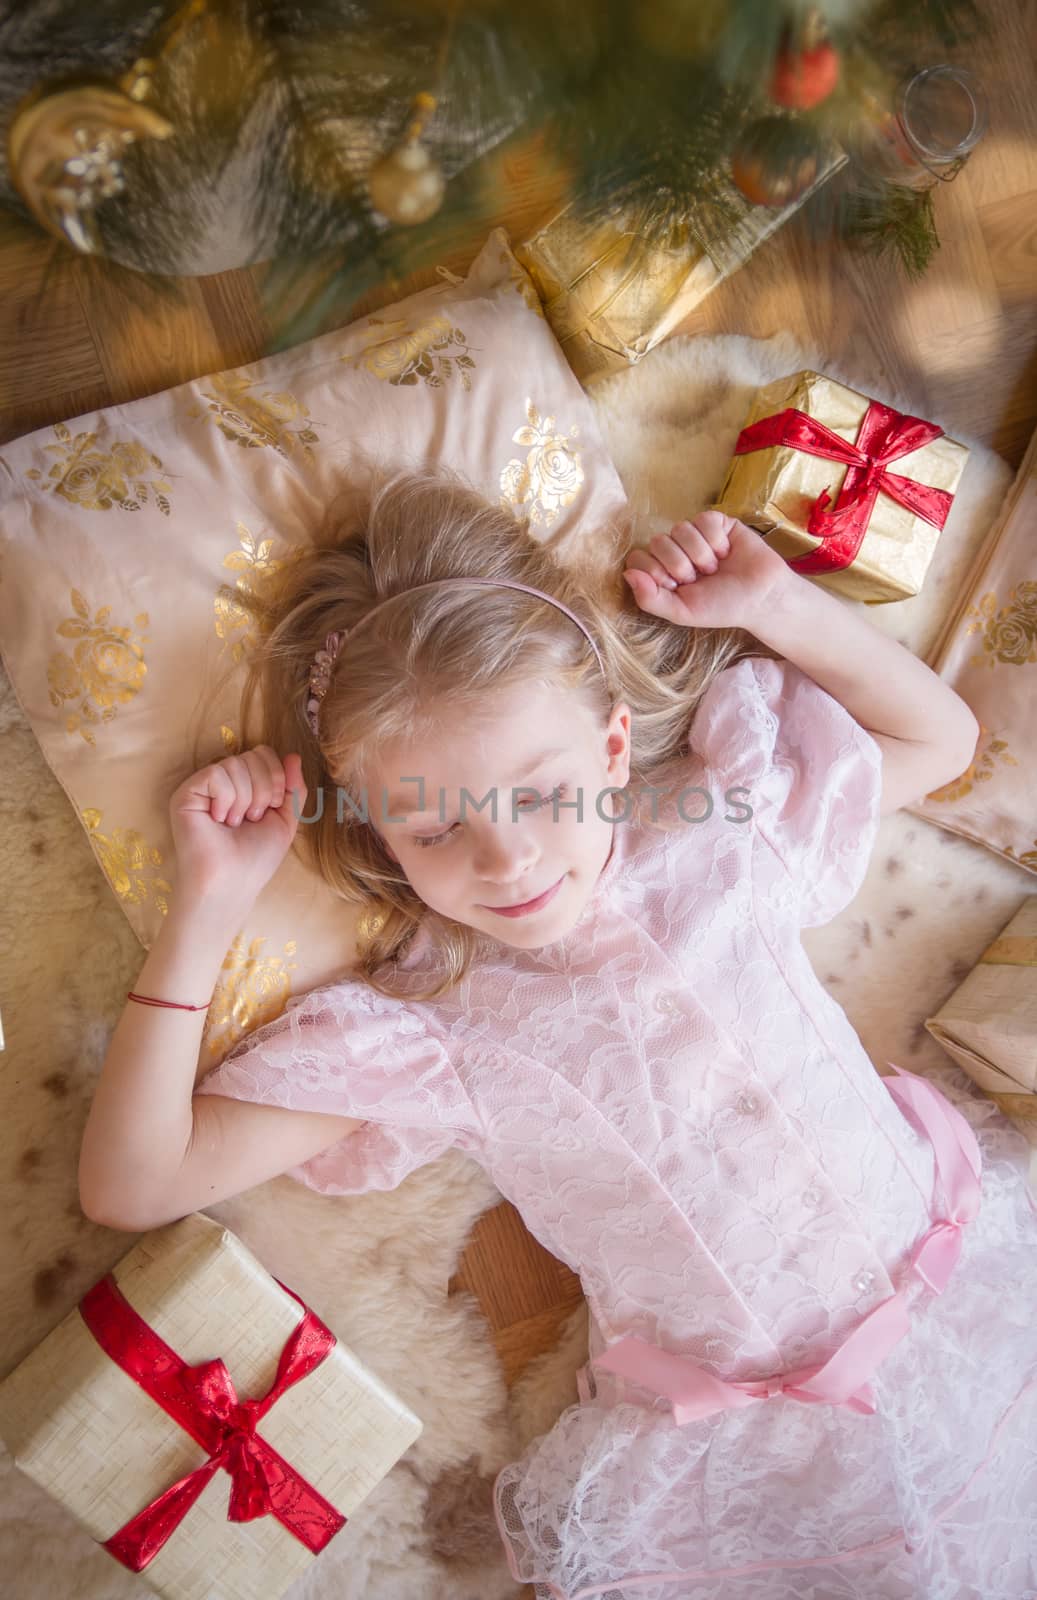 Cute girl dreaming under Christmas tree with gifts by Angel_a